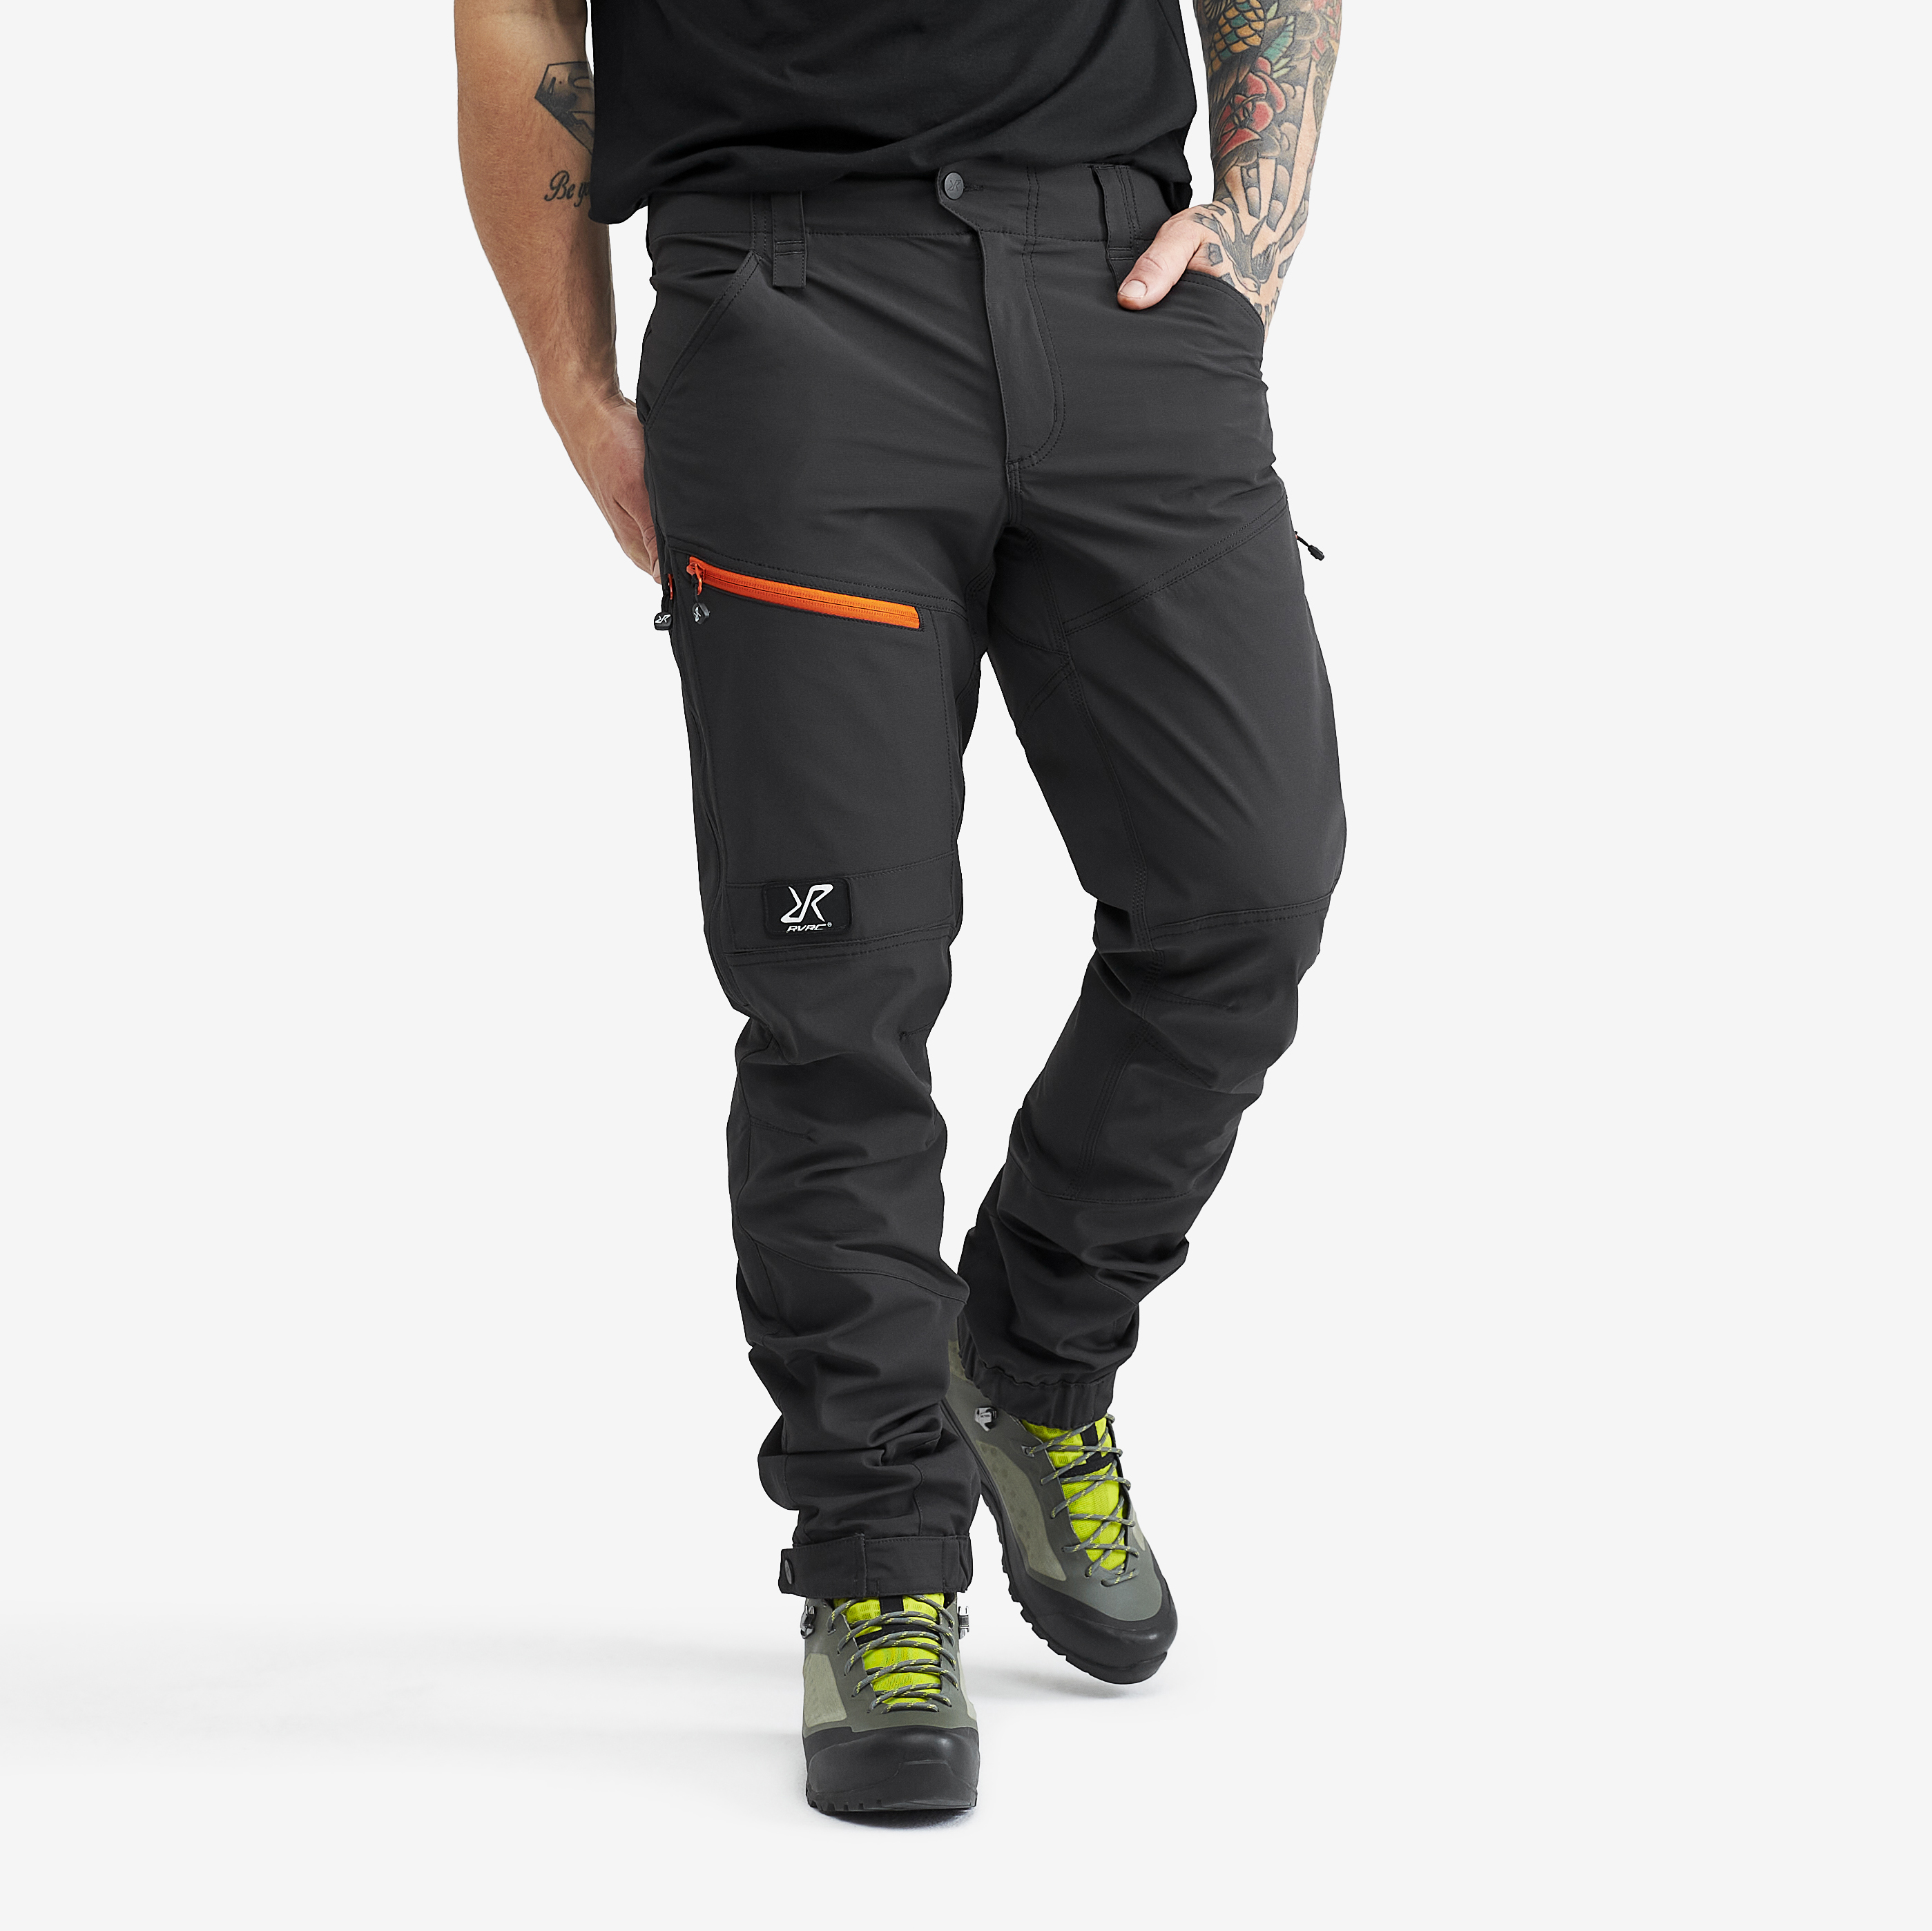 Silence Pants Anthracite Herre